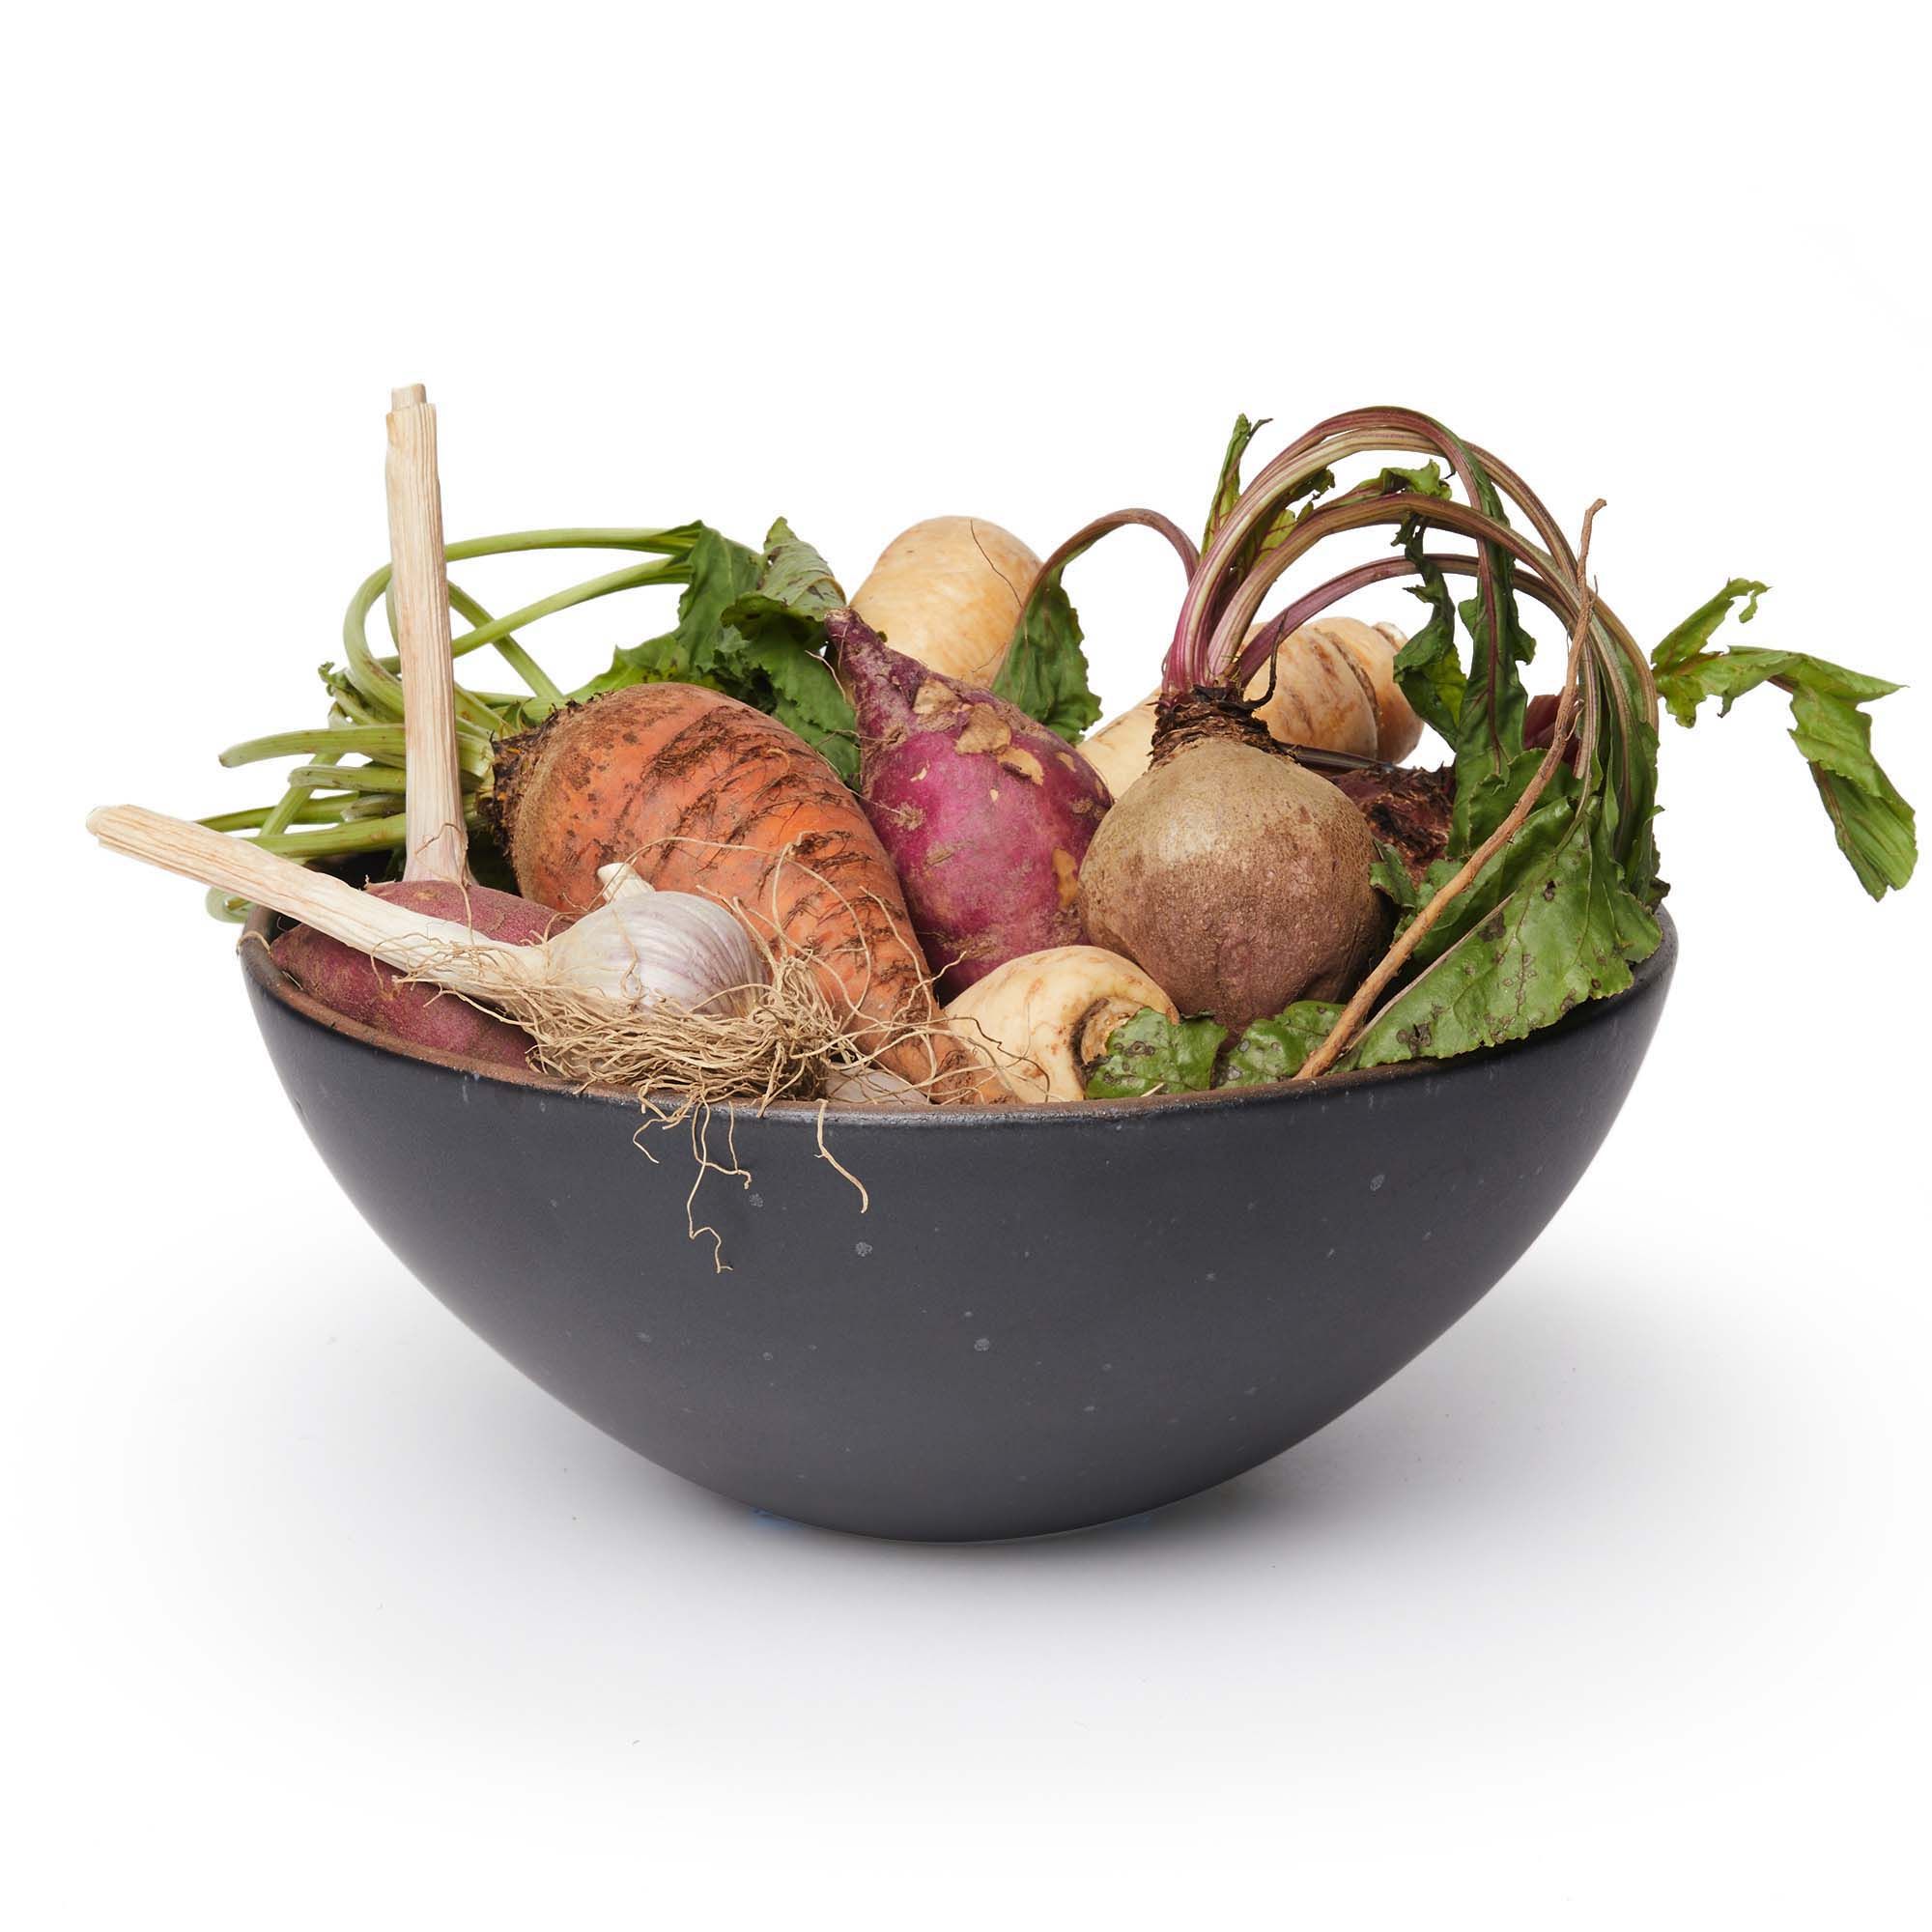 A dark charcoal bowl filled with root vegetables